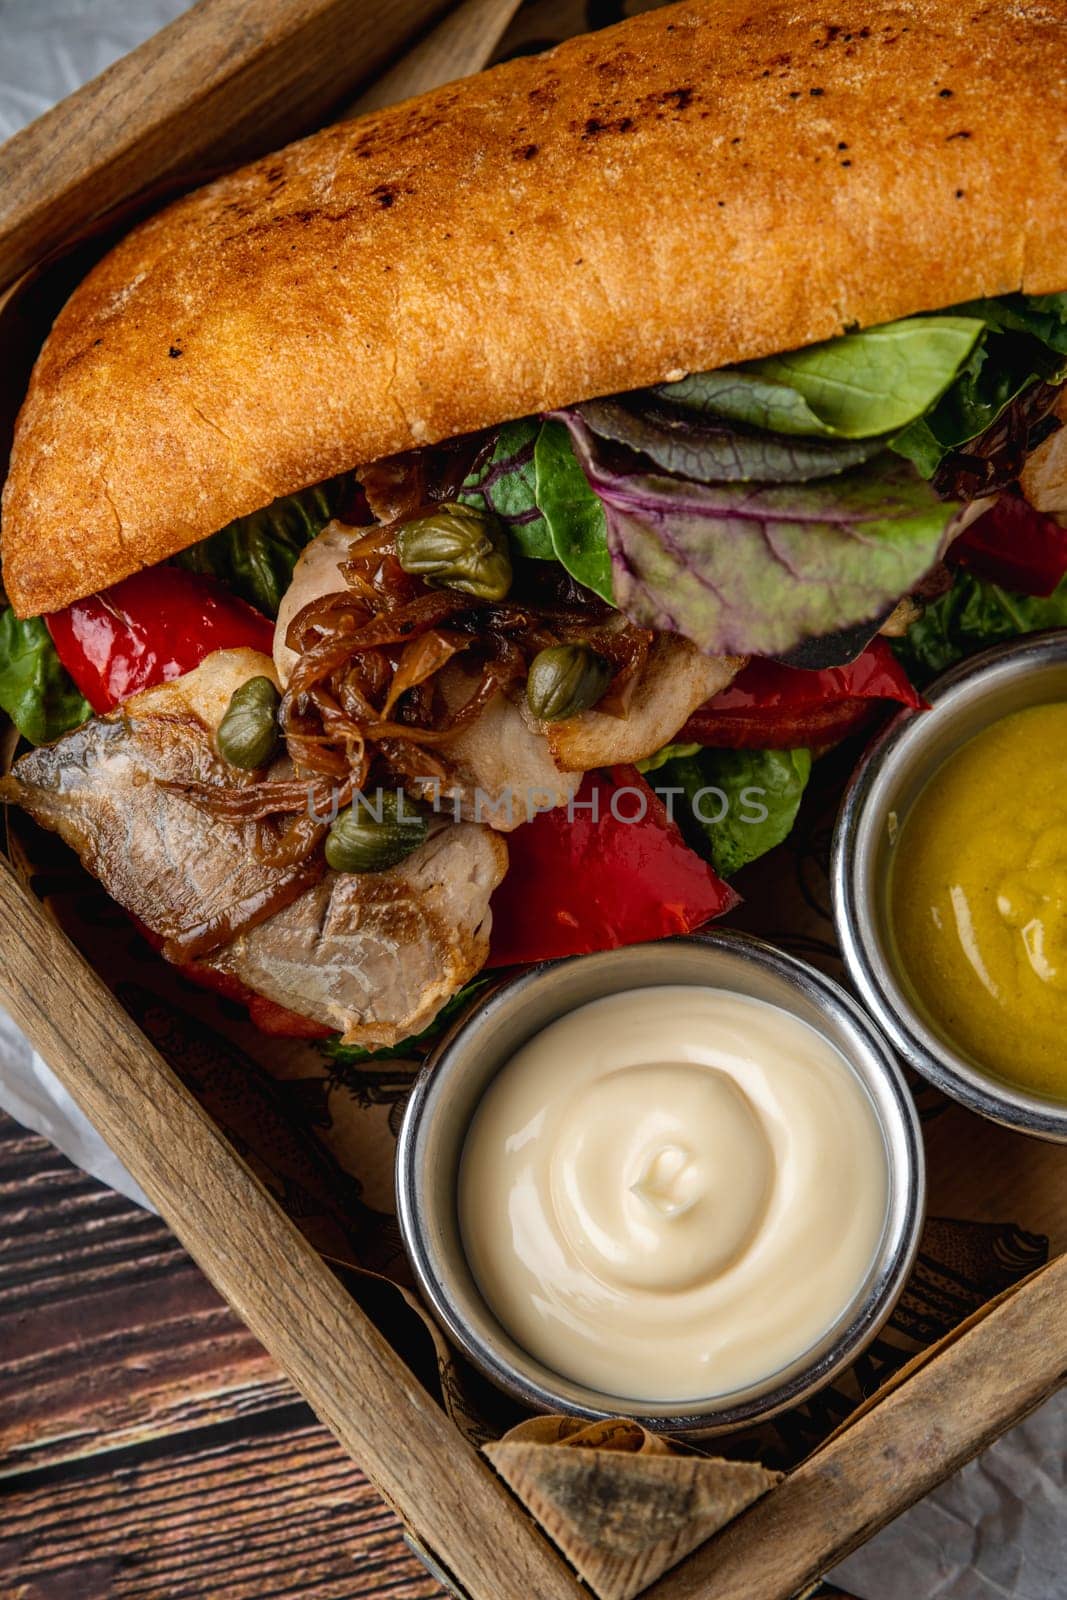 Steak sandwich with sauces and french fries on wooden table